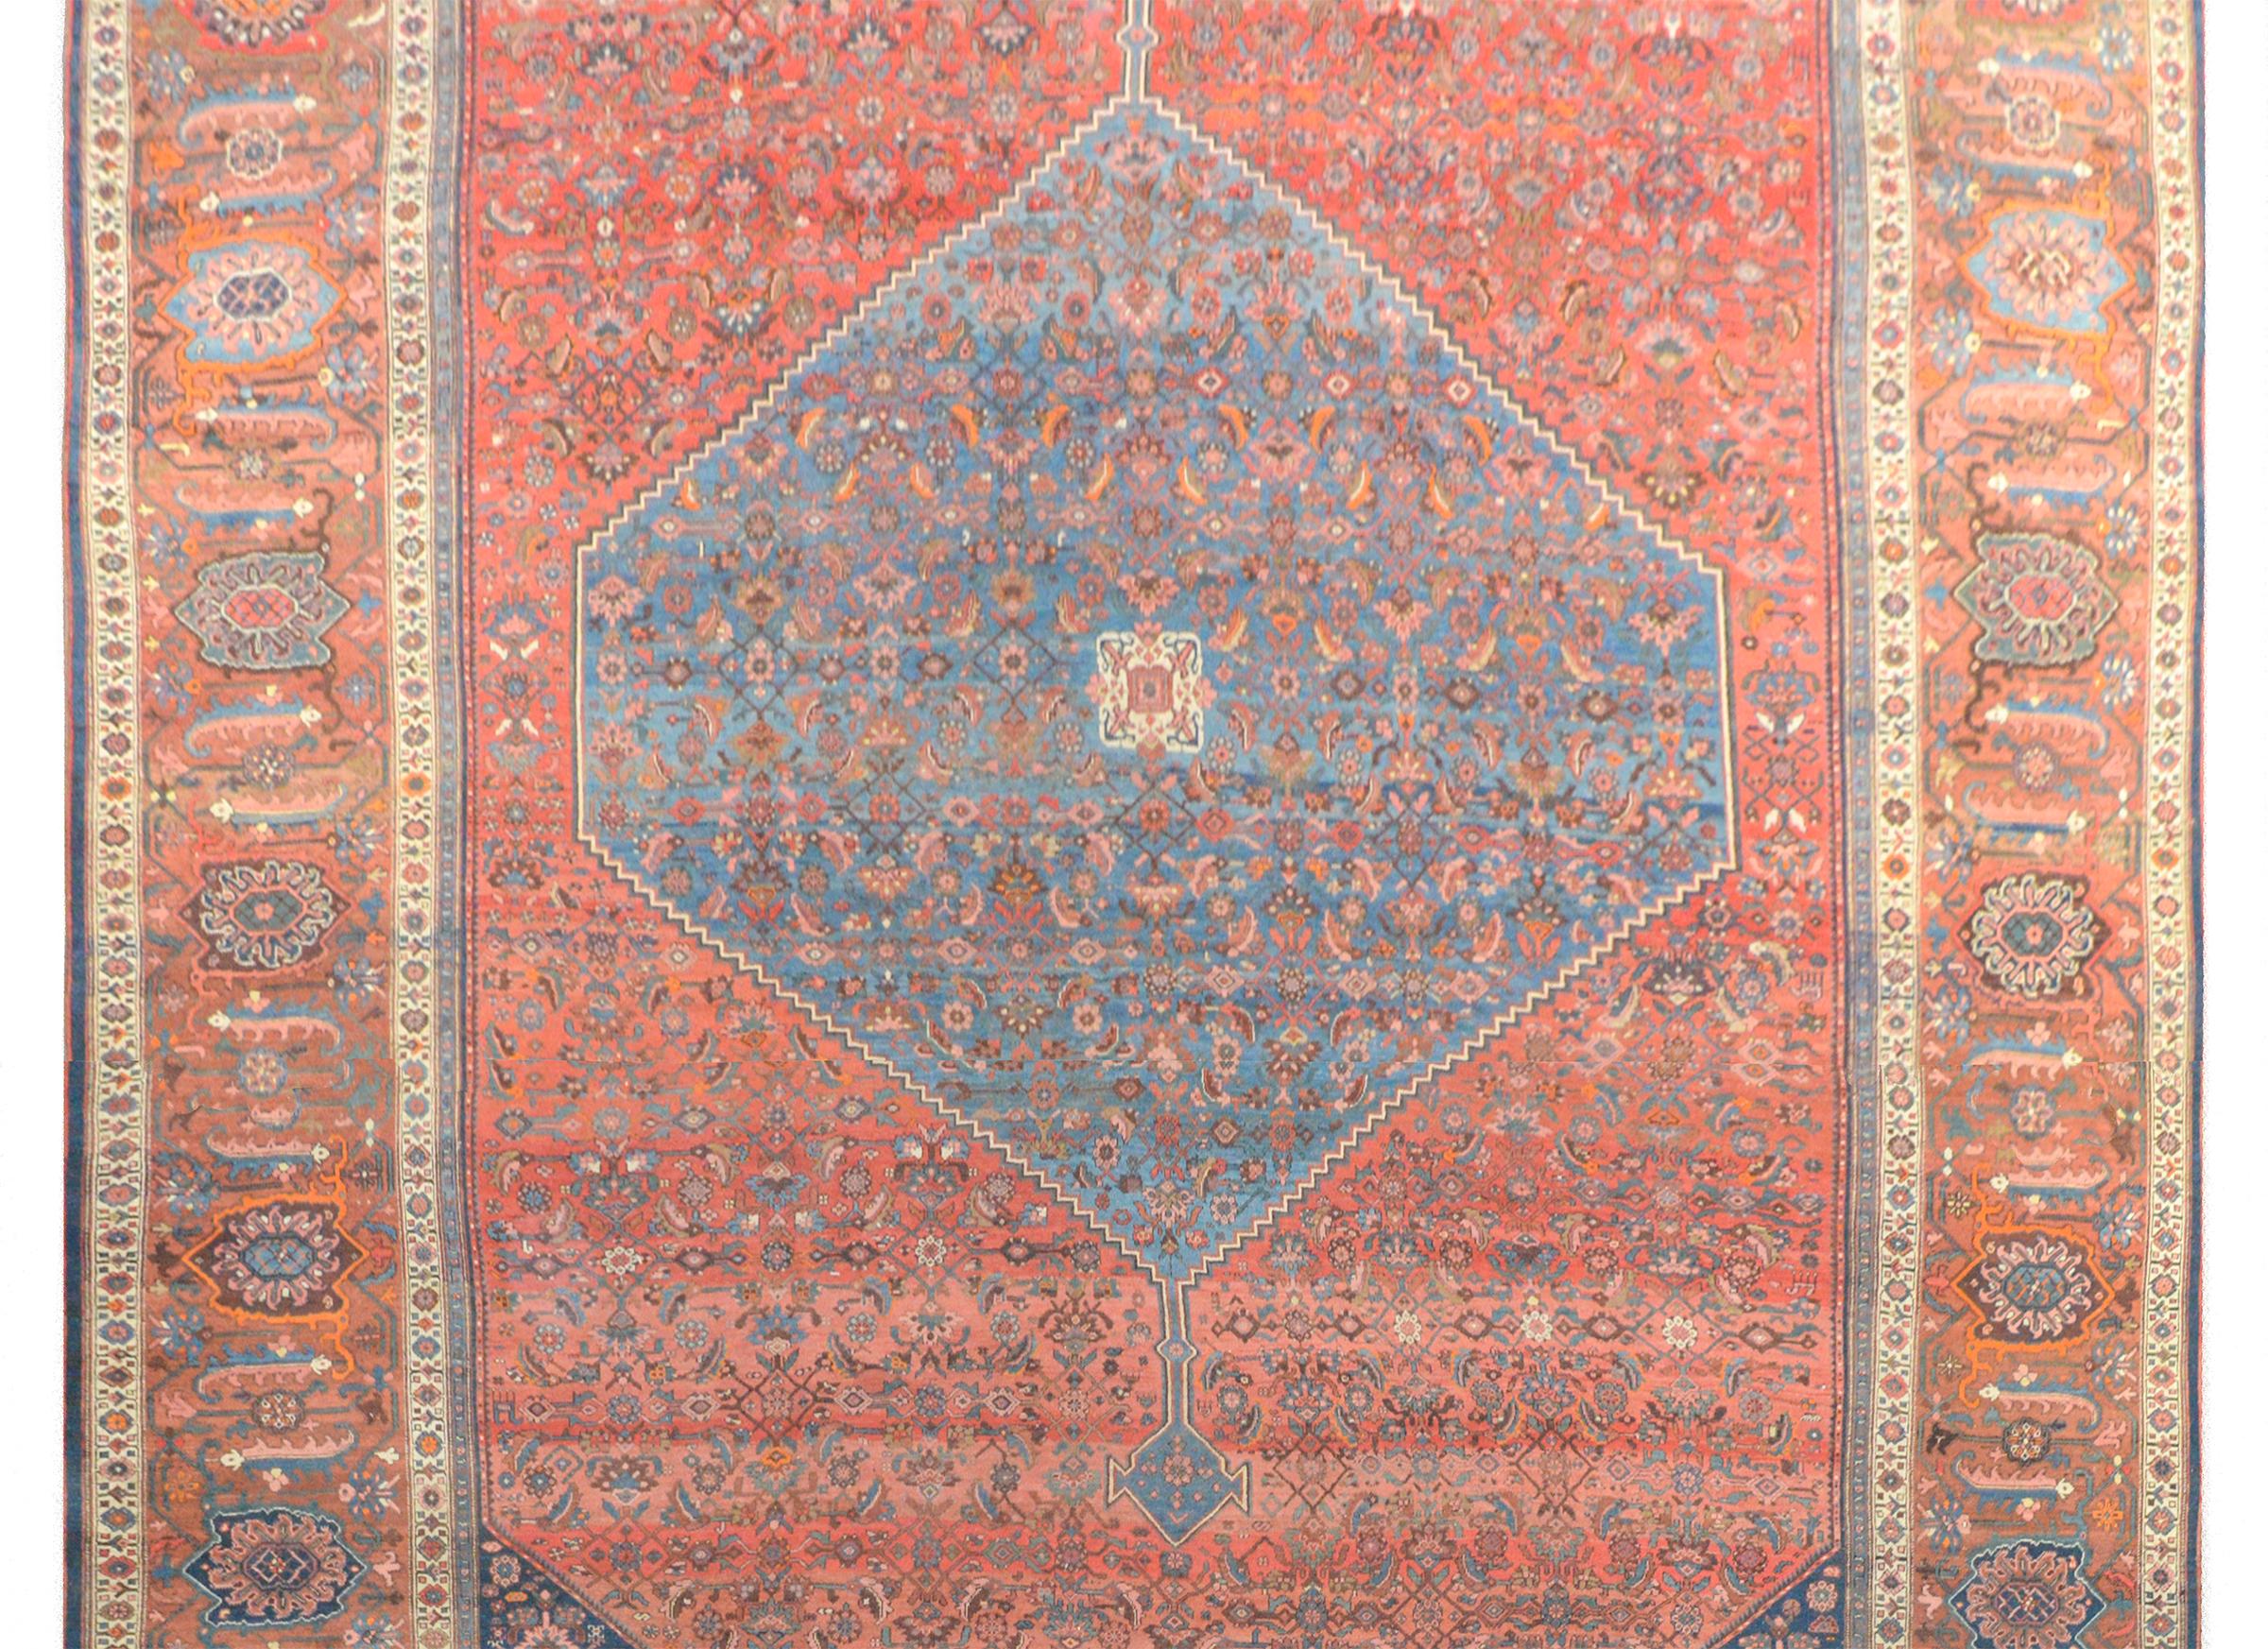 An outstanding palatial-size 19th century Persian Bidjar rug with a large central diamond medallion with a floral and leaf pattern, woven in indigo, orange, cream, brown, and coral, all on an indigo background. The medallion lies on a field of